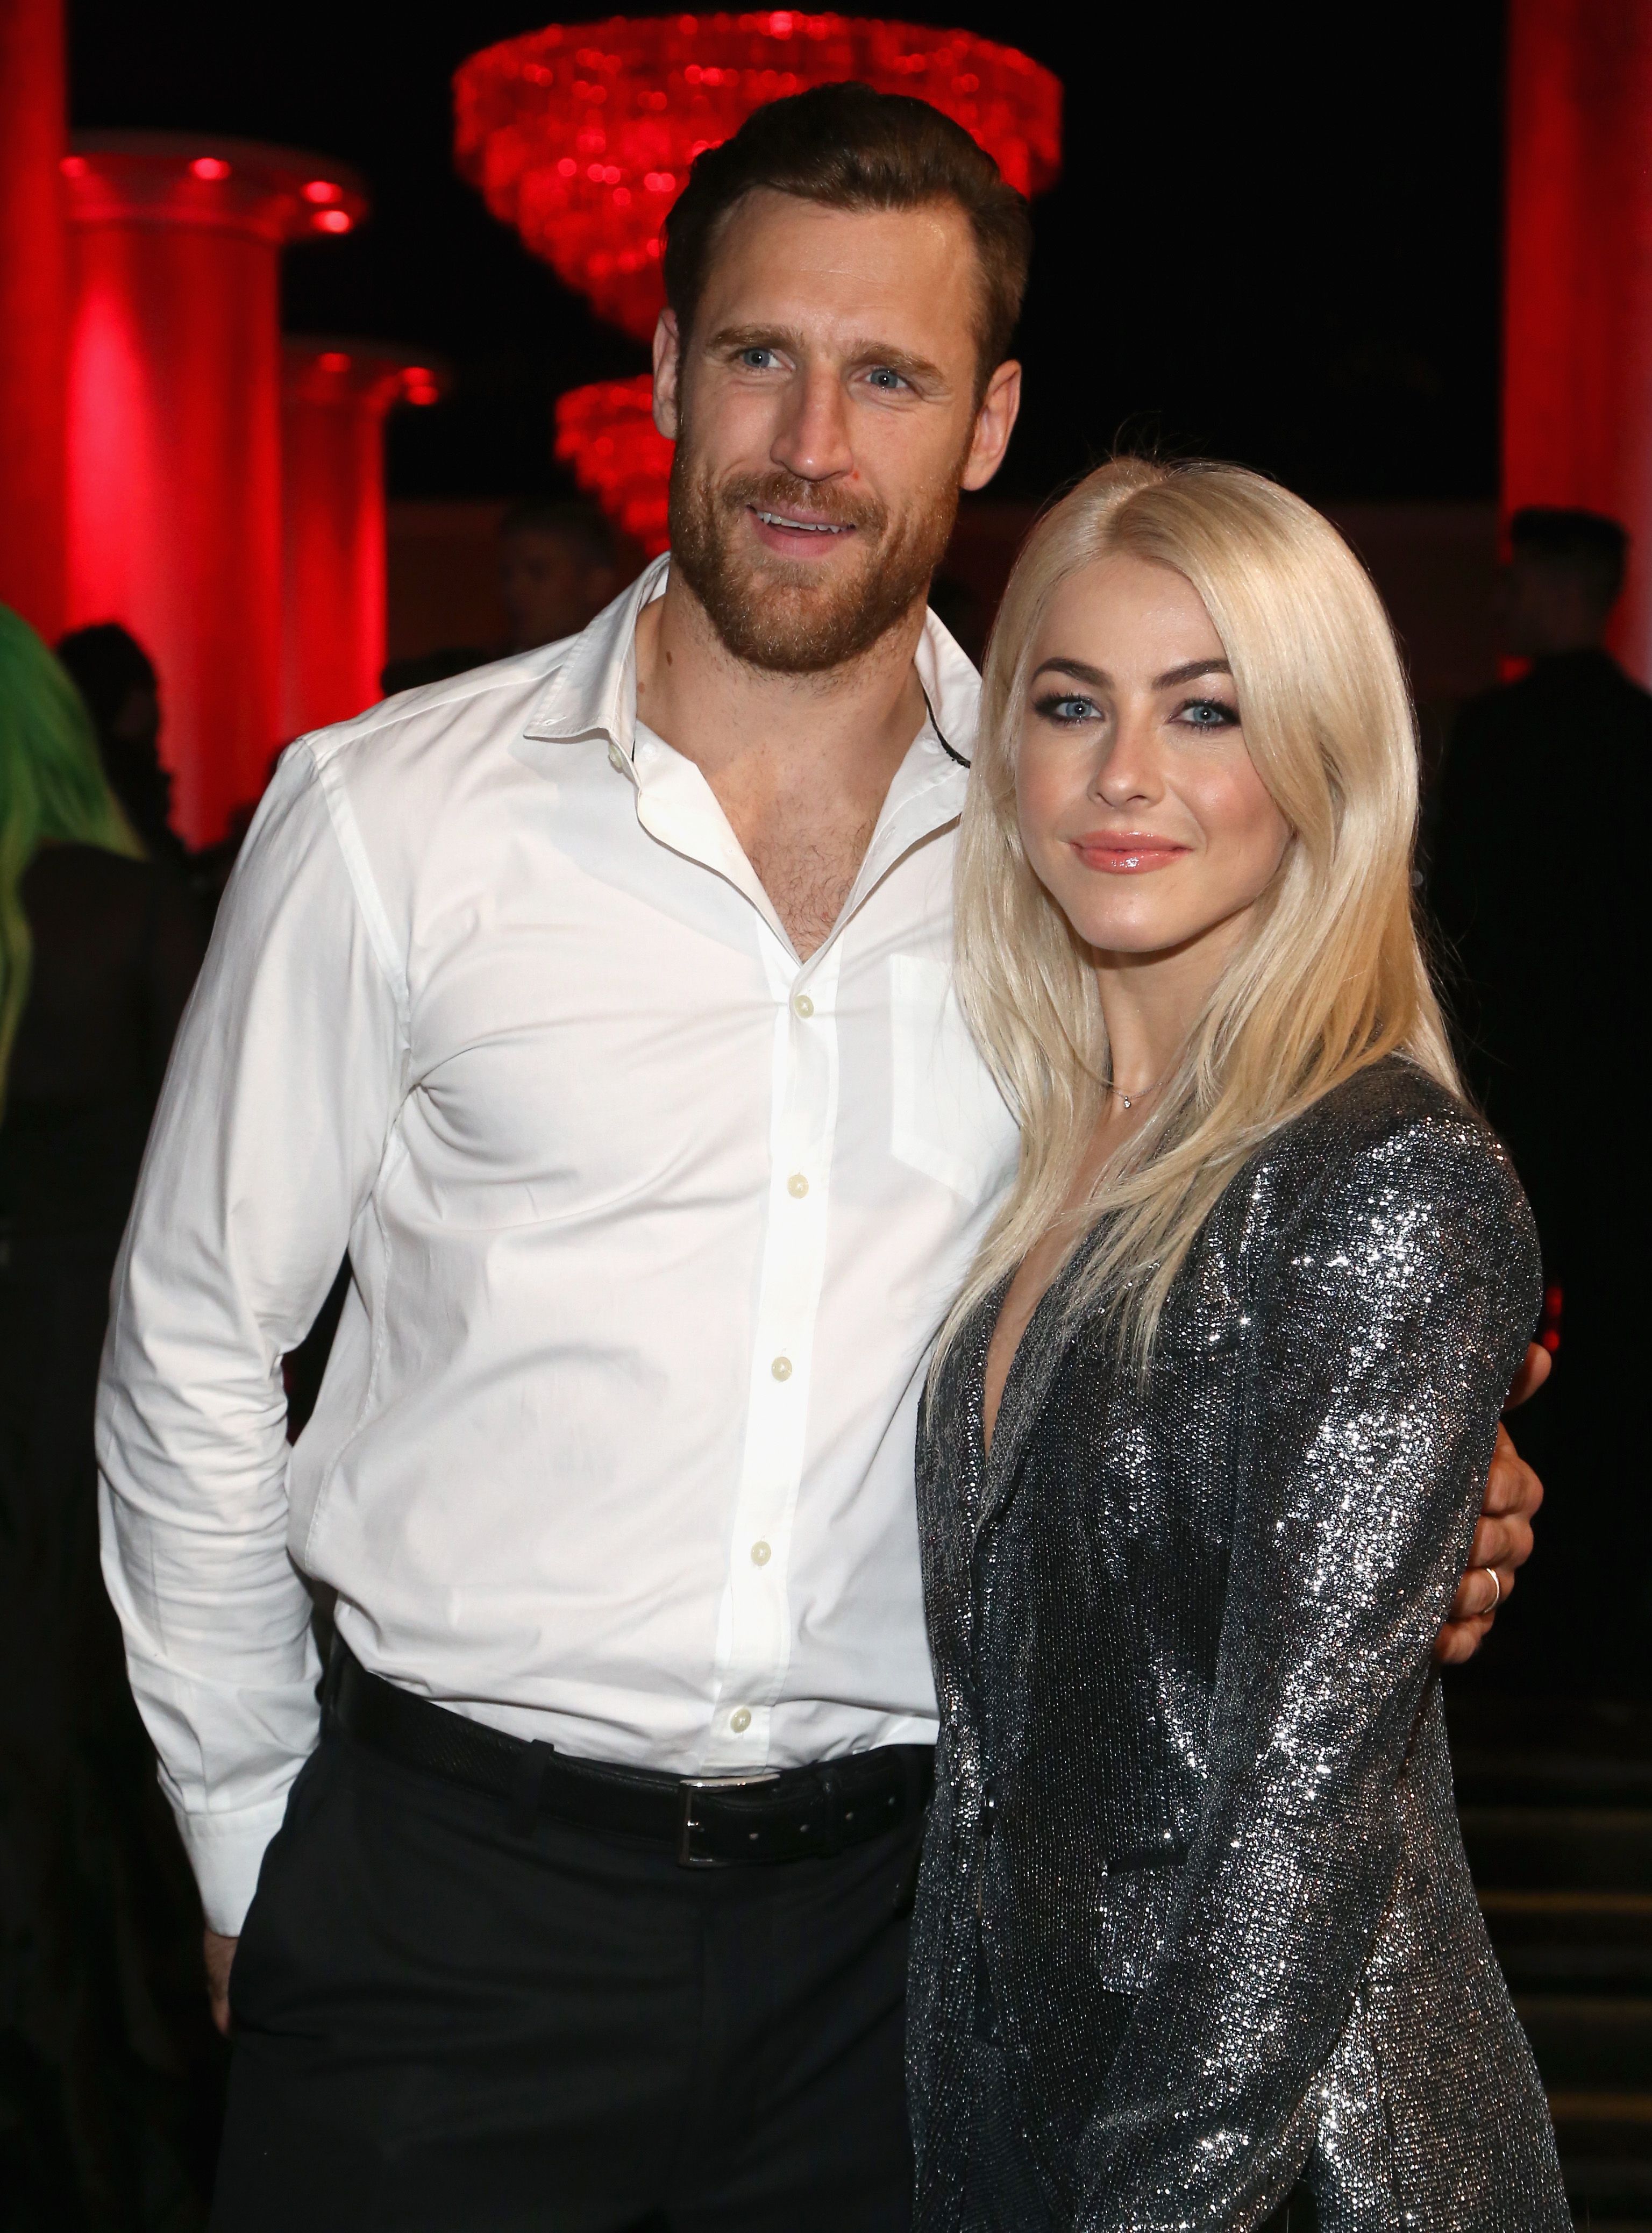 Julianne Hough and her husband Brooks Laich step out together